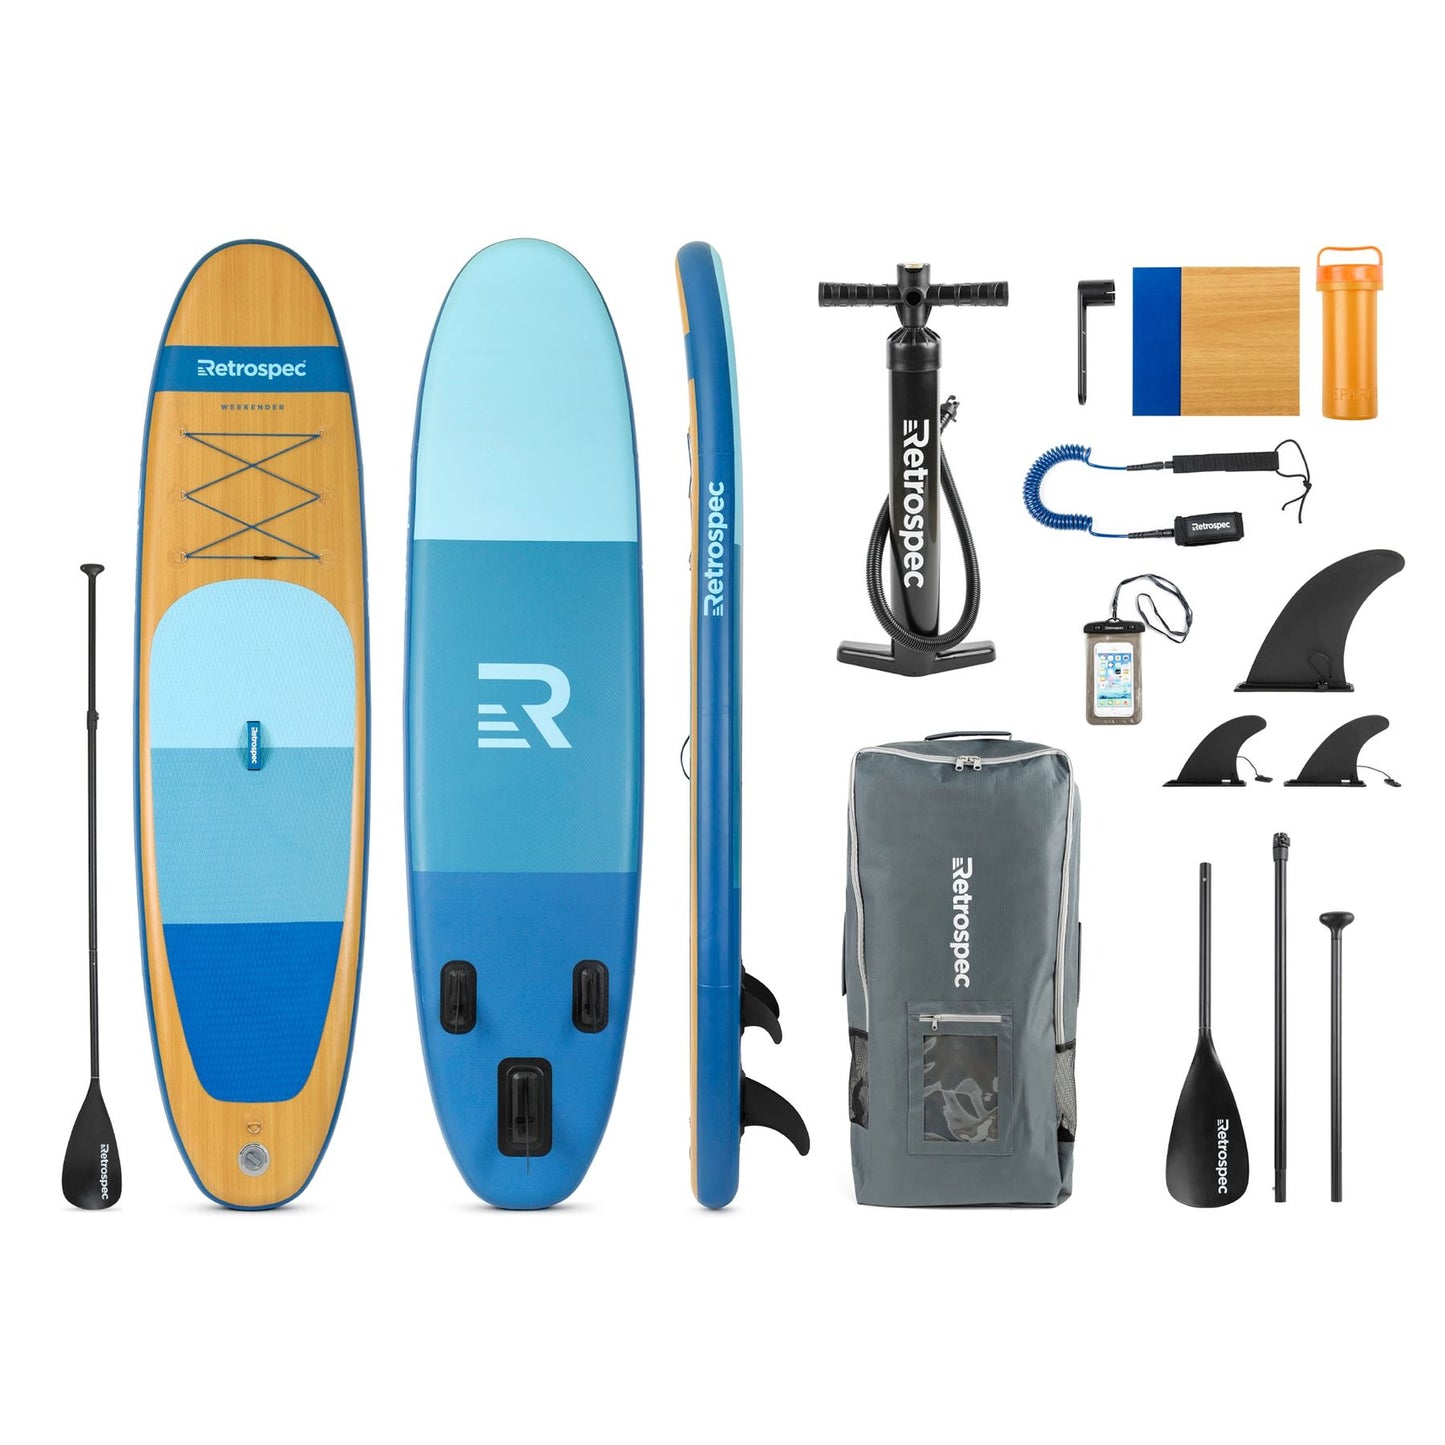 Weekender 10' Inflatable Stand Up Paddleboard SUP Woodgrain Blue